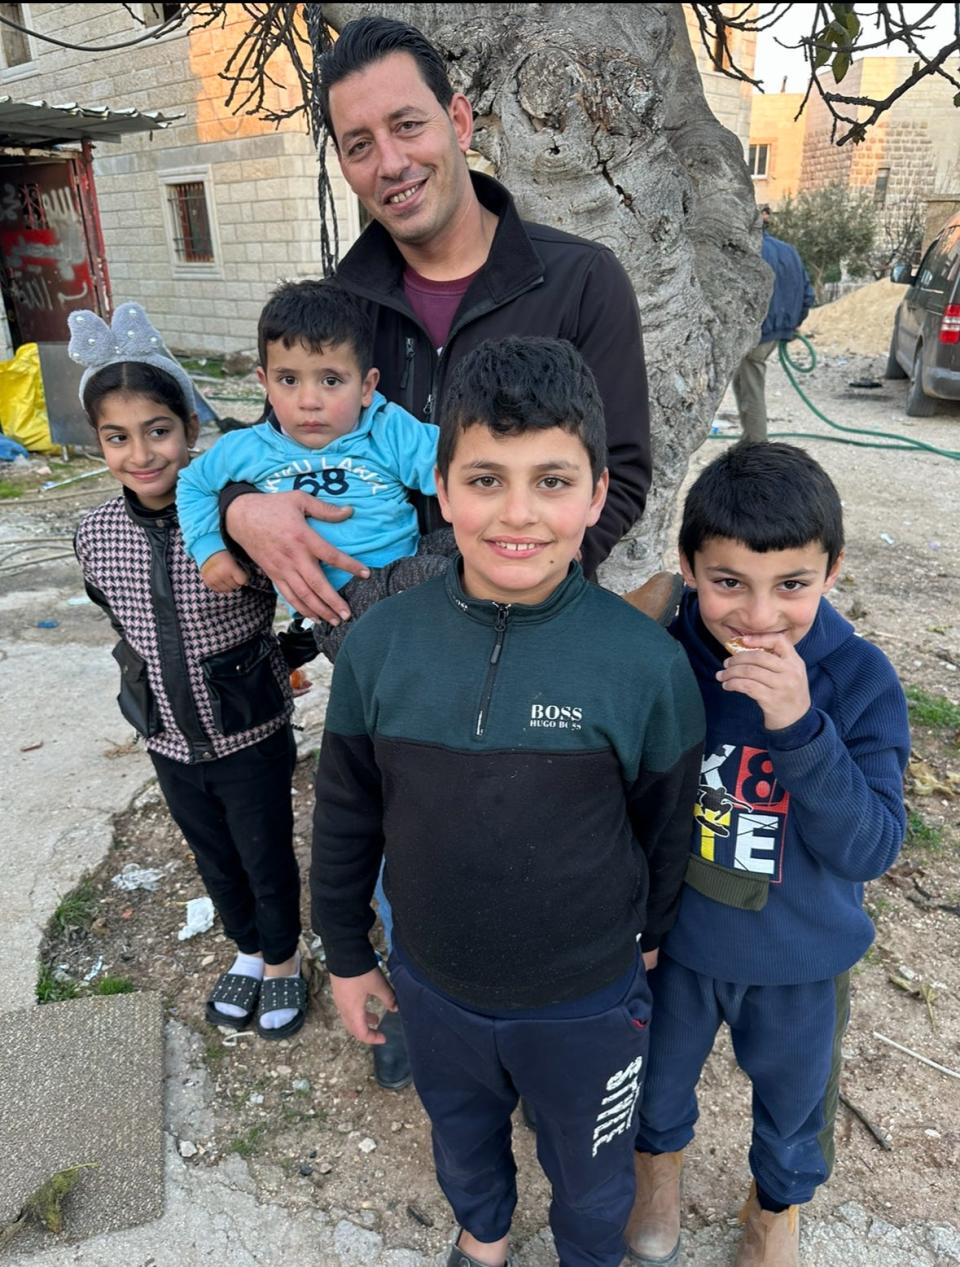 Omar Zawharah, the West Bank high school teacher who showed Mark Patinkin around the West Bank for a day, holding his nephew and with his daughter and two sons.